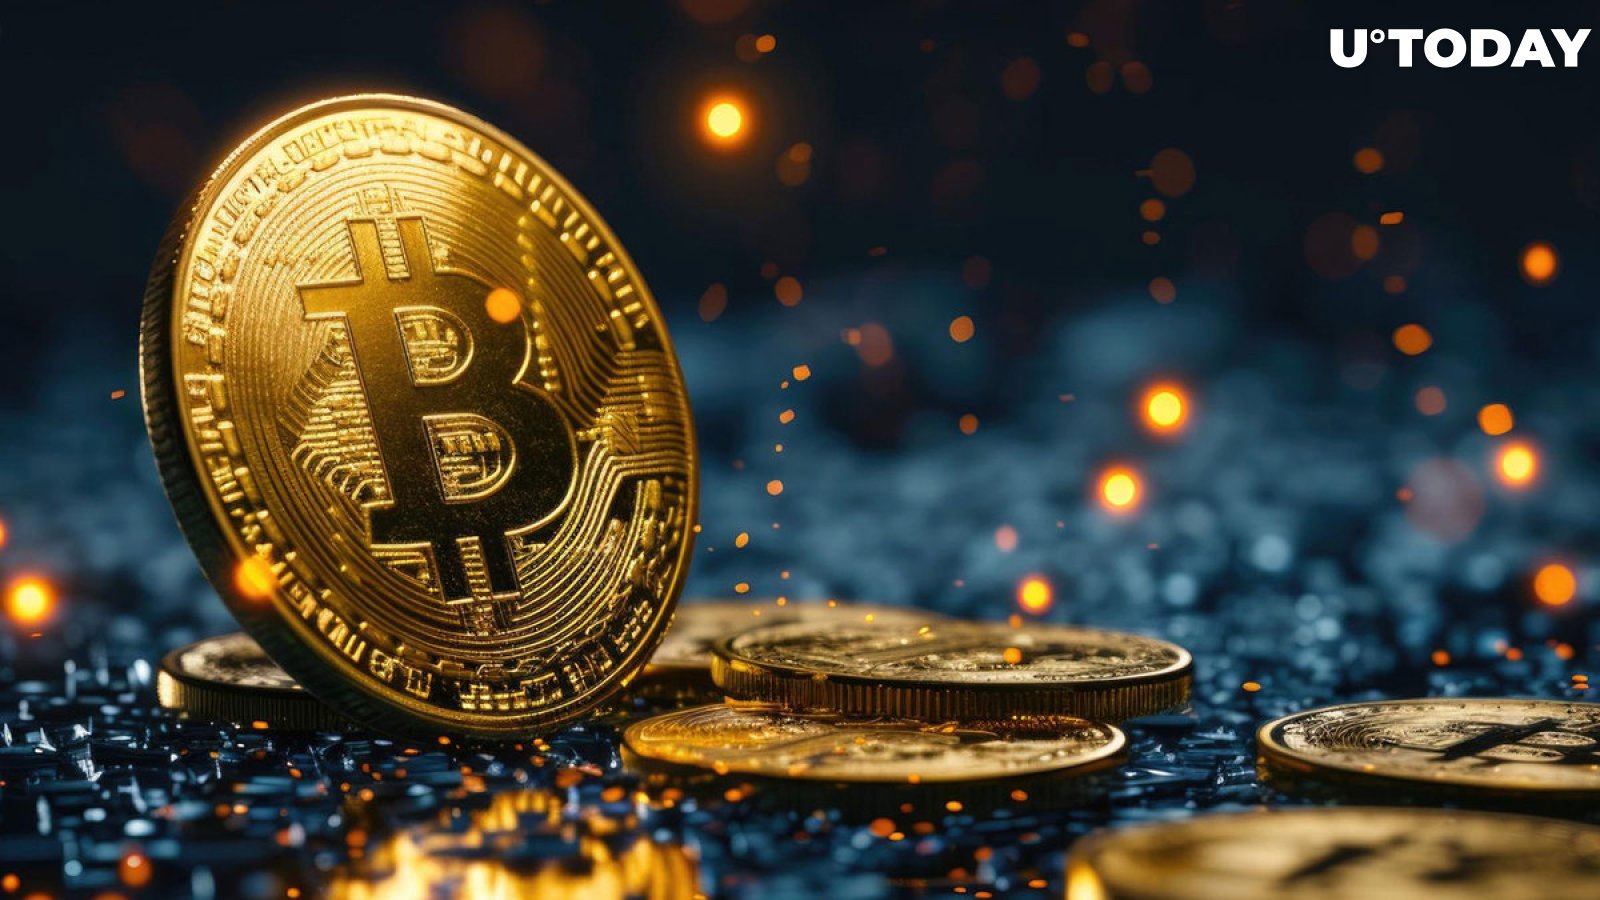 Bitcoin (BTC) Network Can Sustain $256K Price Target: Analyst